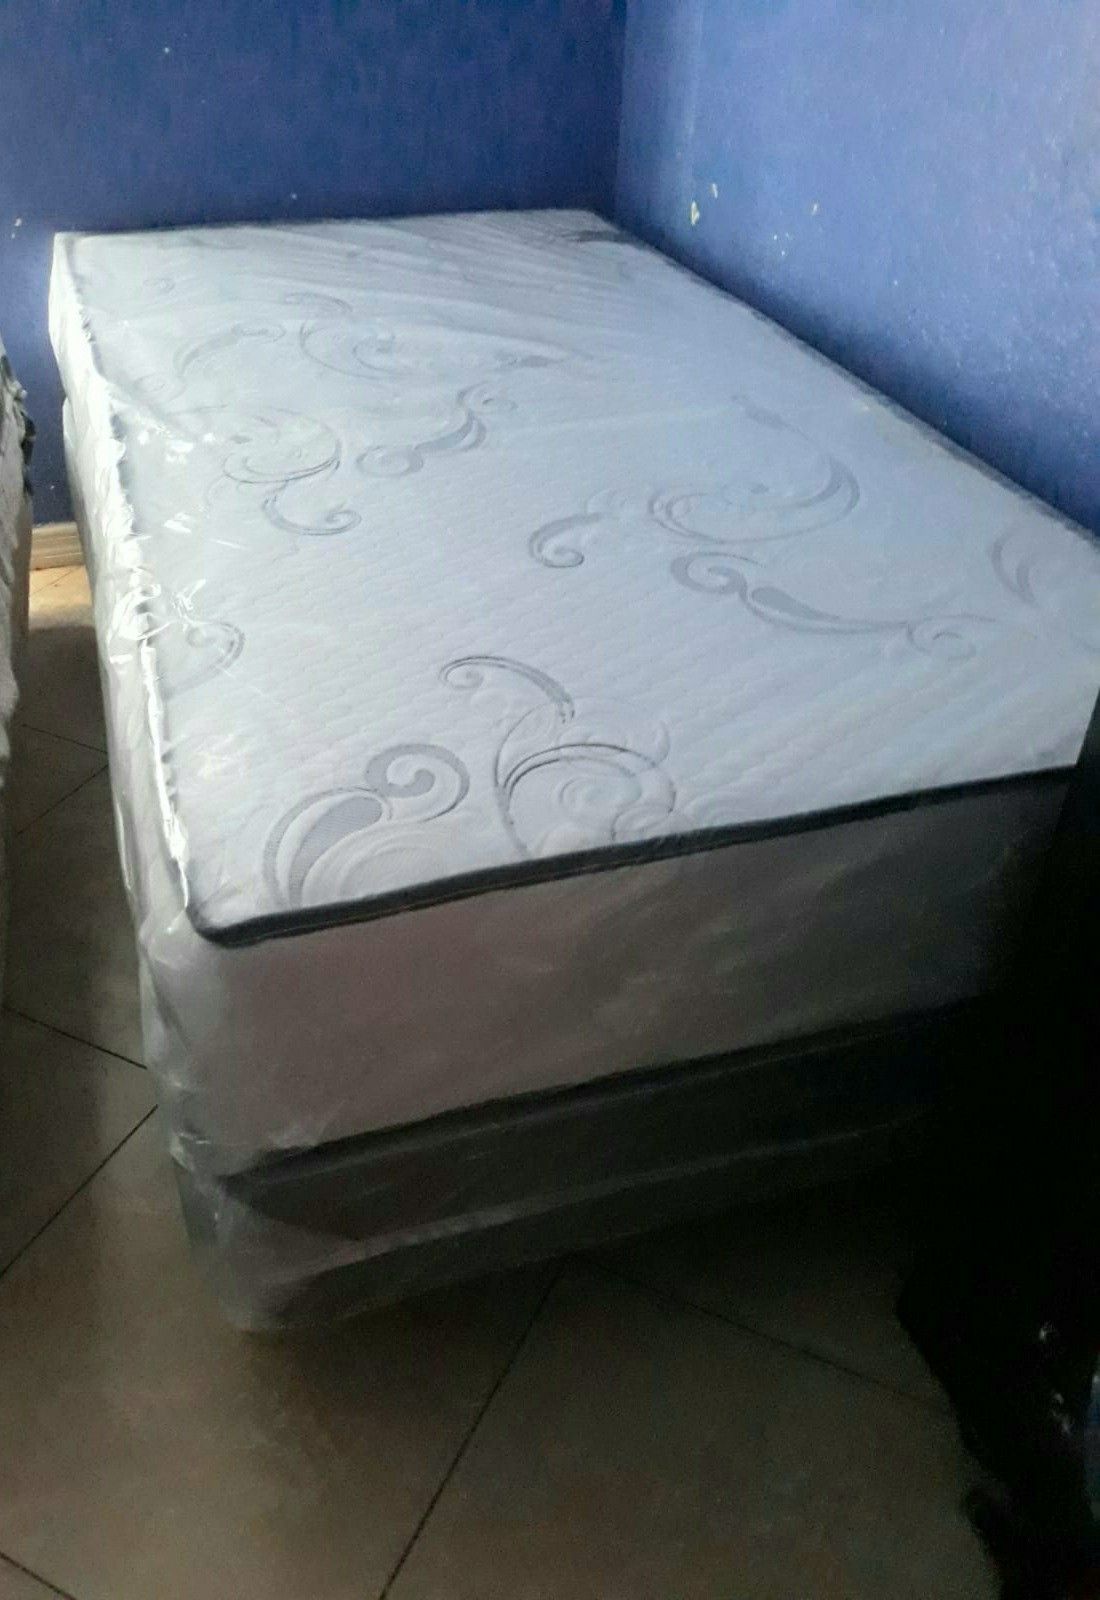 NEW TWIN MATTRESS AND BOX SPRING 2PC, bed frame not included on price